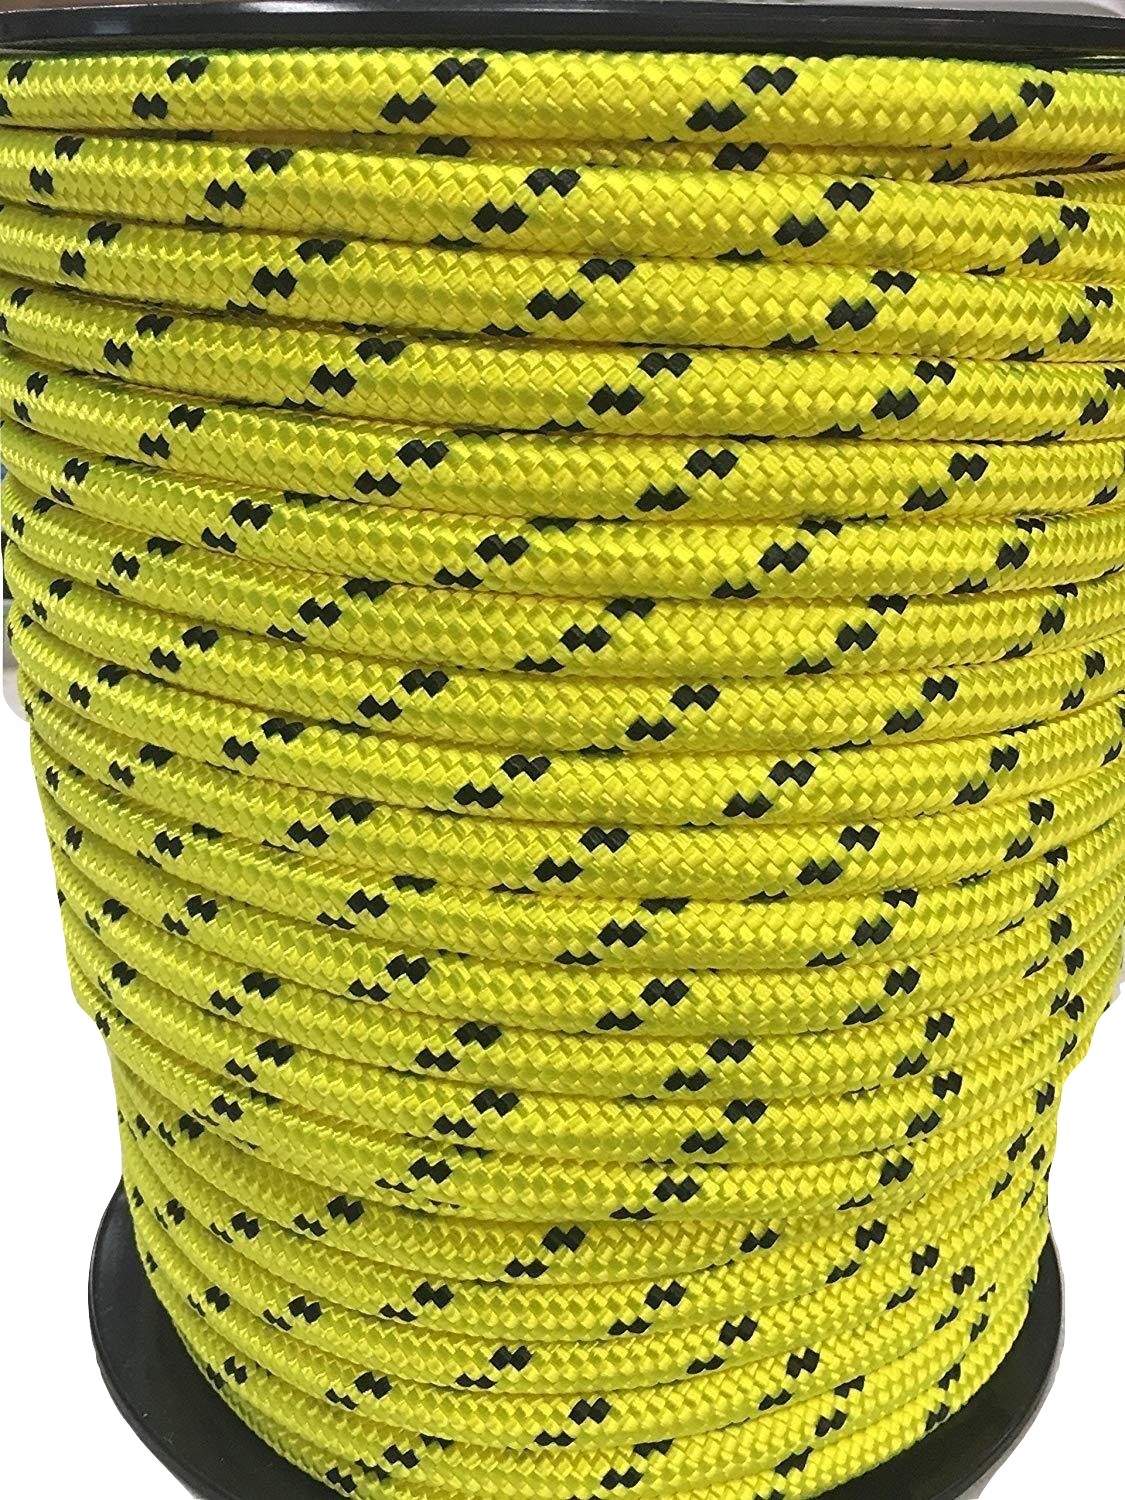 1/2 Arborist Double Braided Polyester Rope - Blue Ox Rope